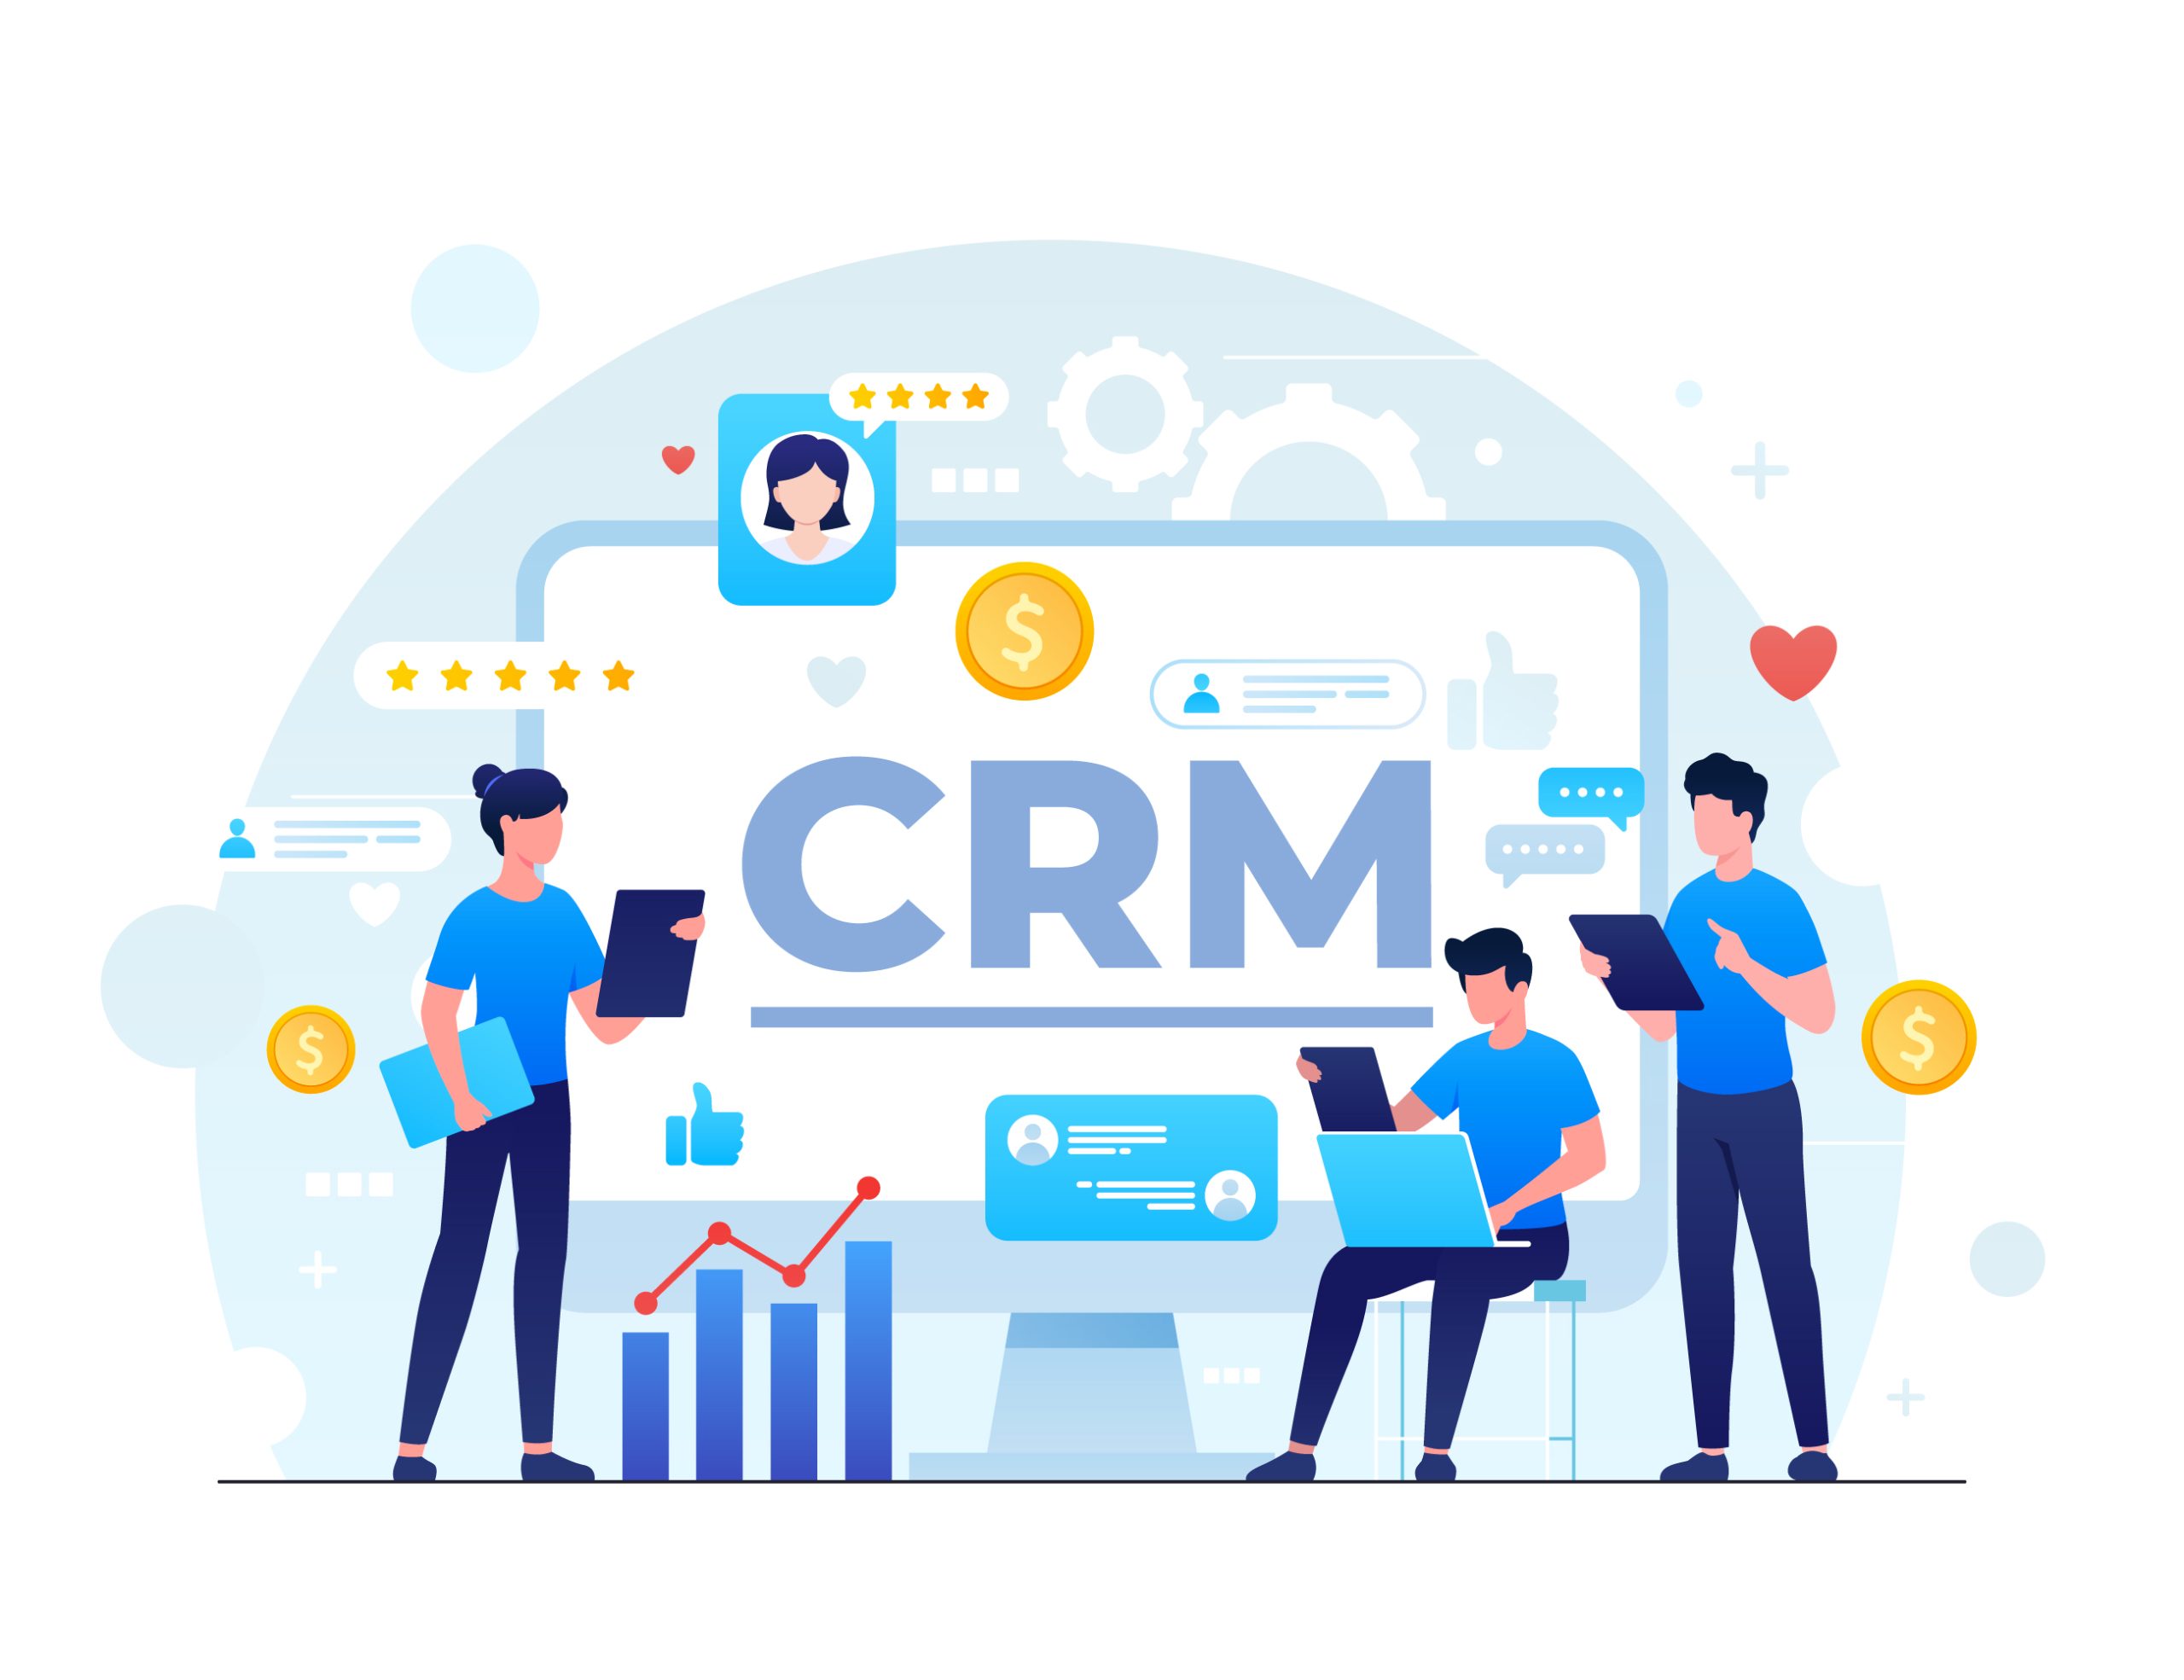 free crm software, free crm software downoad, free opensource crm software download, btn infosolution, crm with billing, Free CRM Software for Small Businesses, Best CRM Software, online CRM software, Free CRM with Billing System, Free CRM with HR Management system, free crm script download